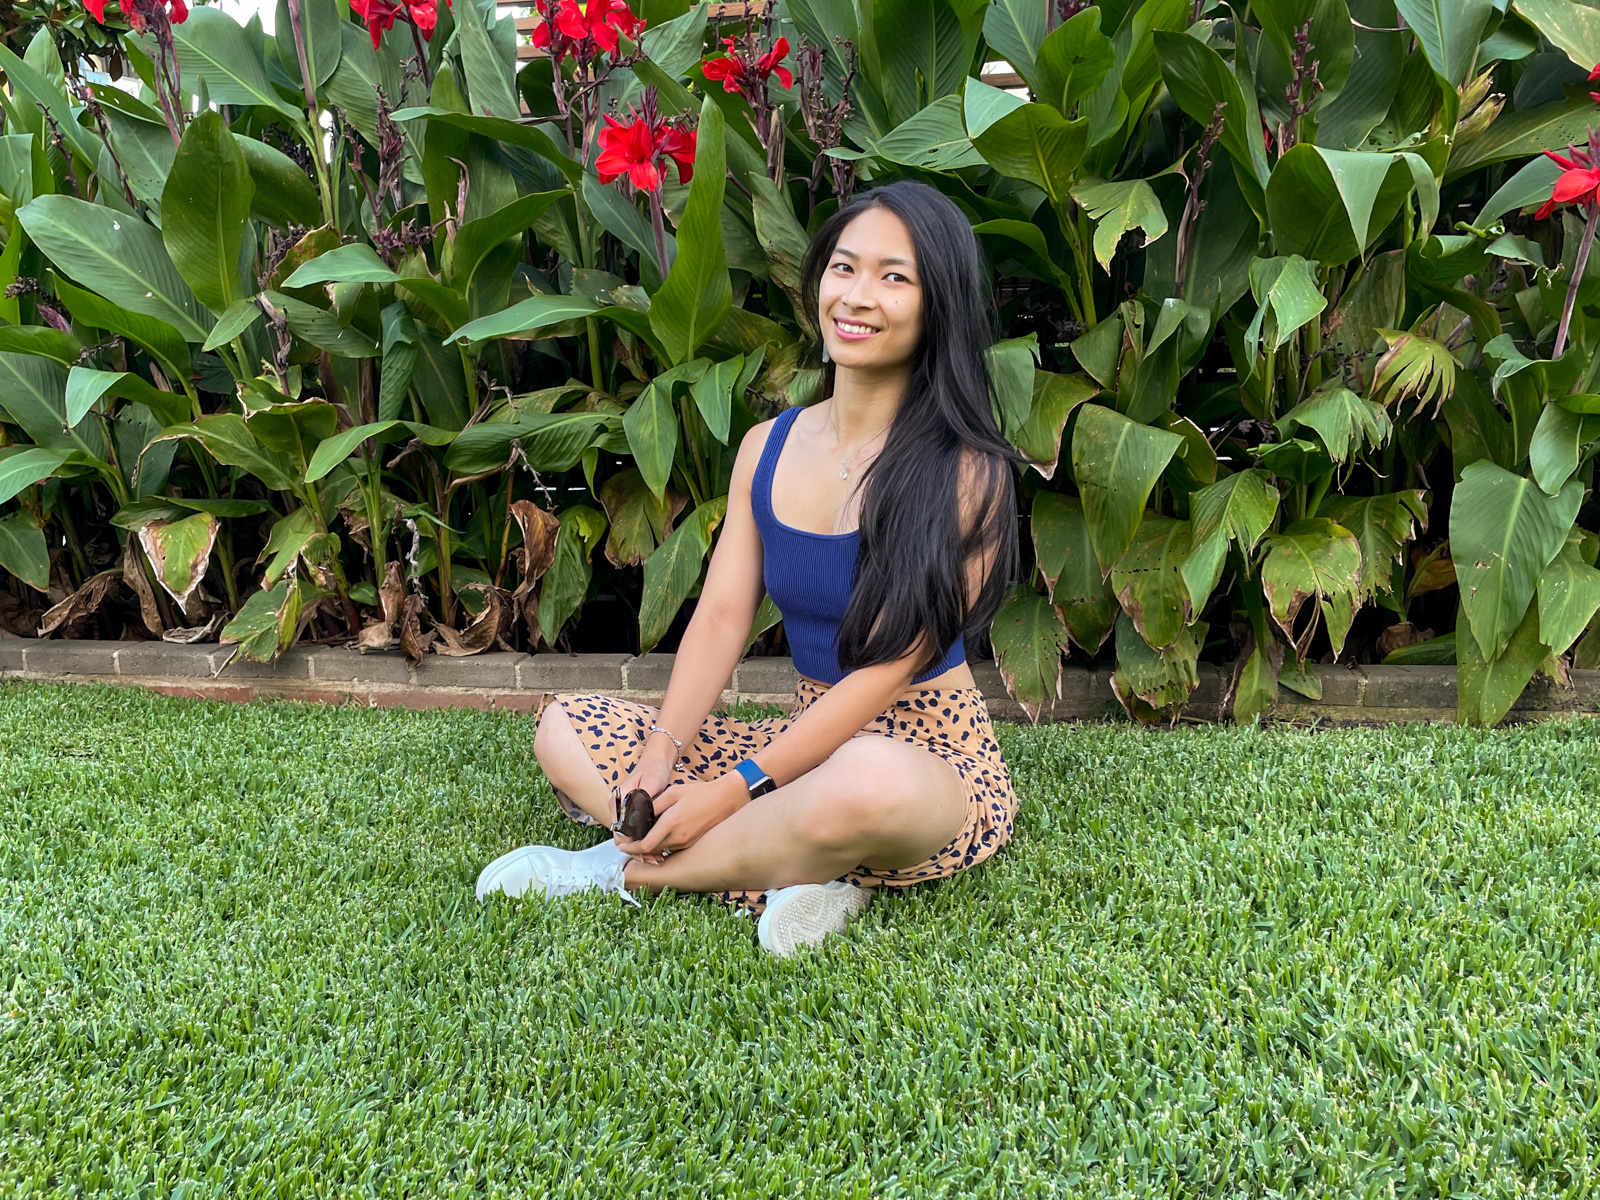 An Asian woman with long dark hair, wearing a long tan coloured midi skirt with a dark animal print, and a fitted blue top. She is sitting on freshly mowed green grass with her hands in her lap.